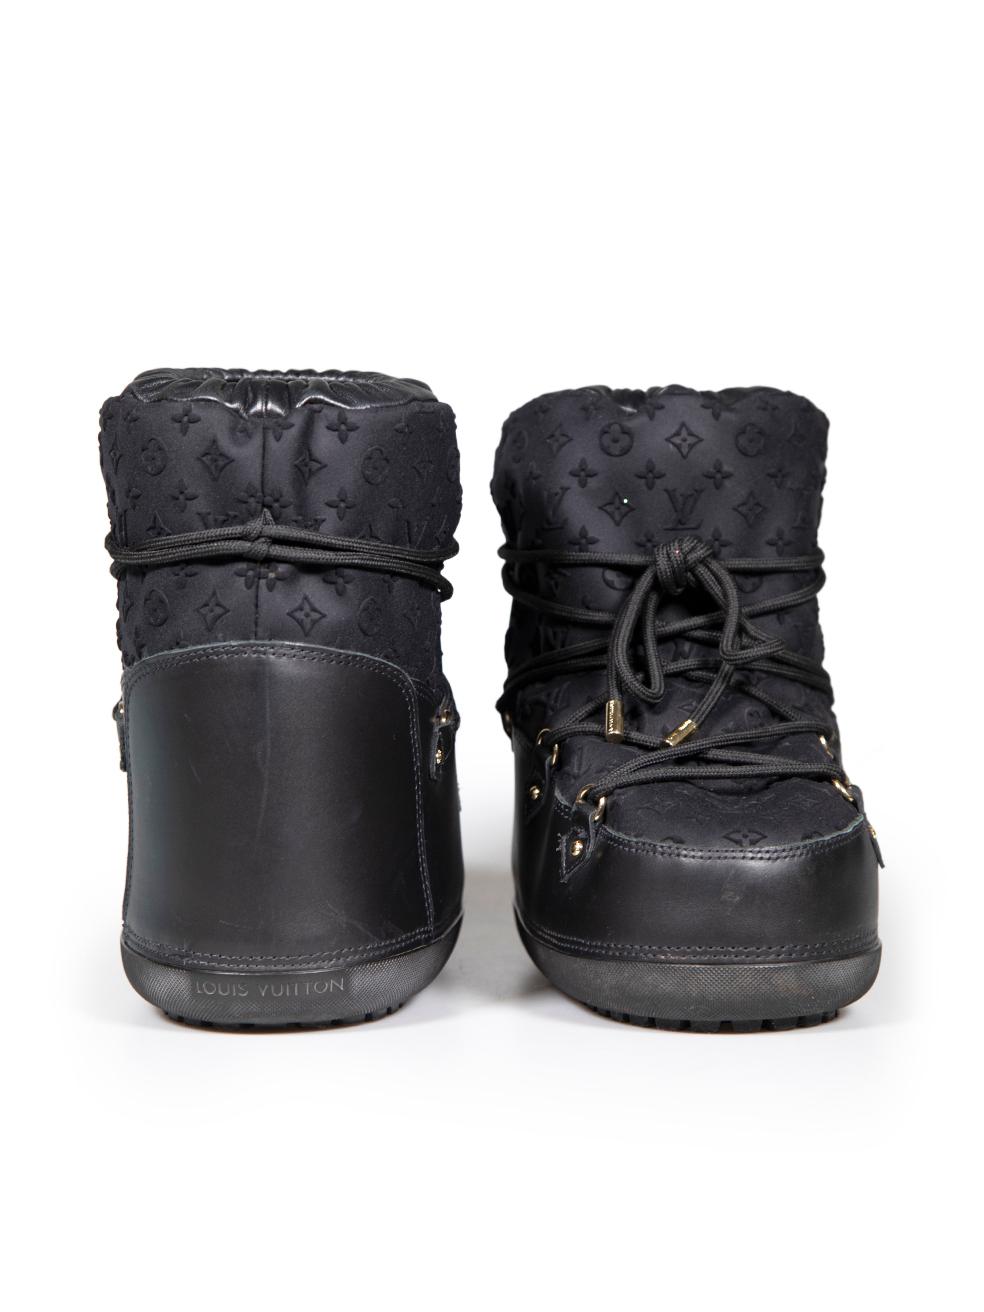 Louis Vuitton Black Embossed Off Piste Snow Boots Size IT 37 In Good Condition For Sale In London, GB